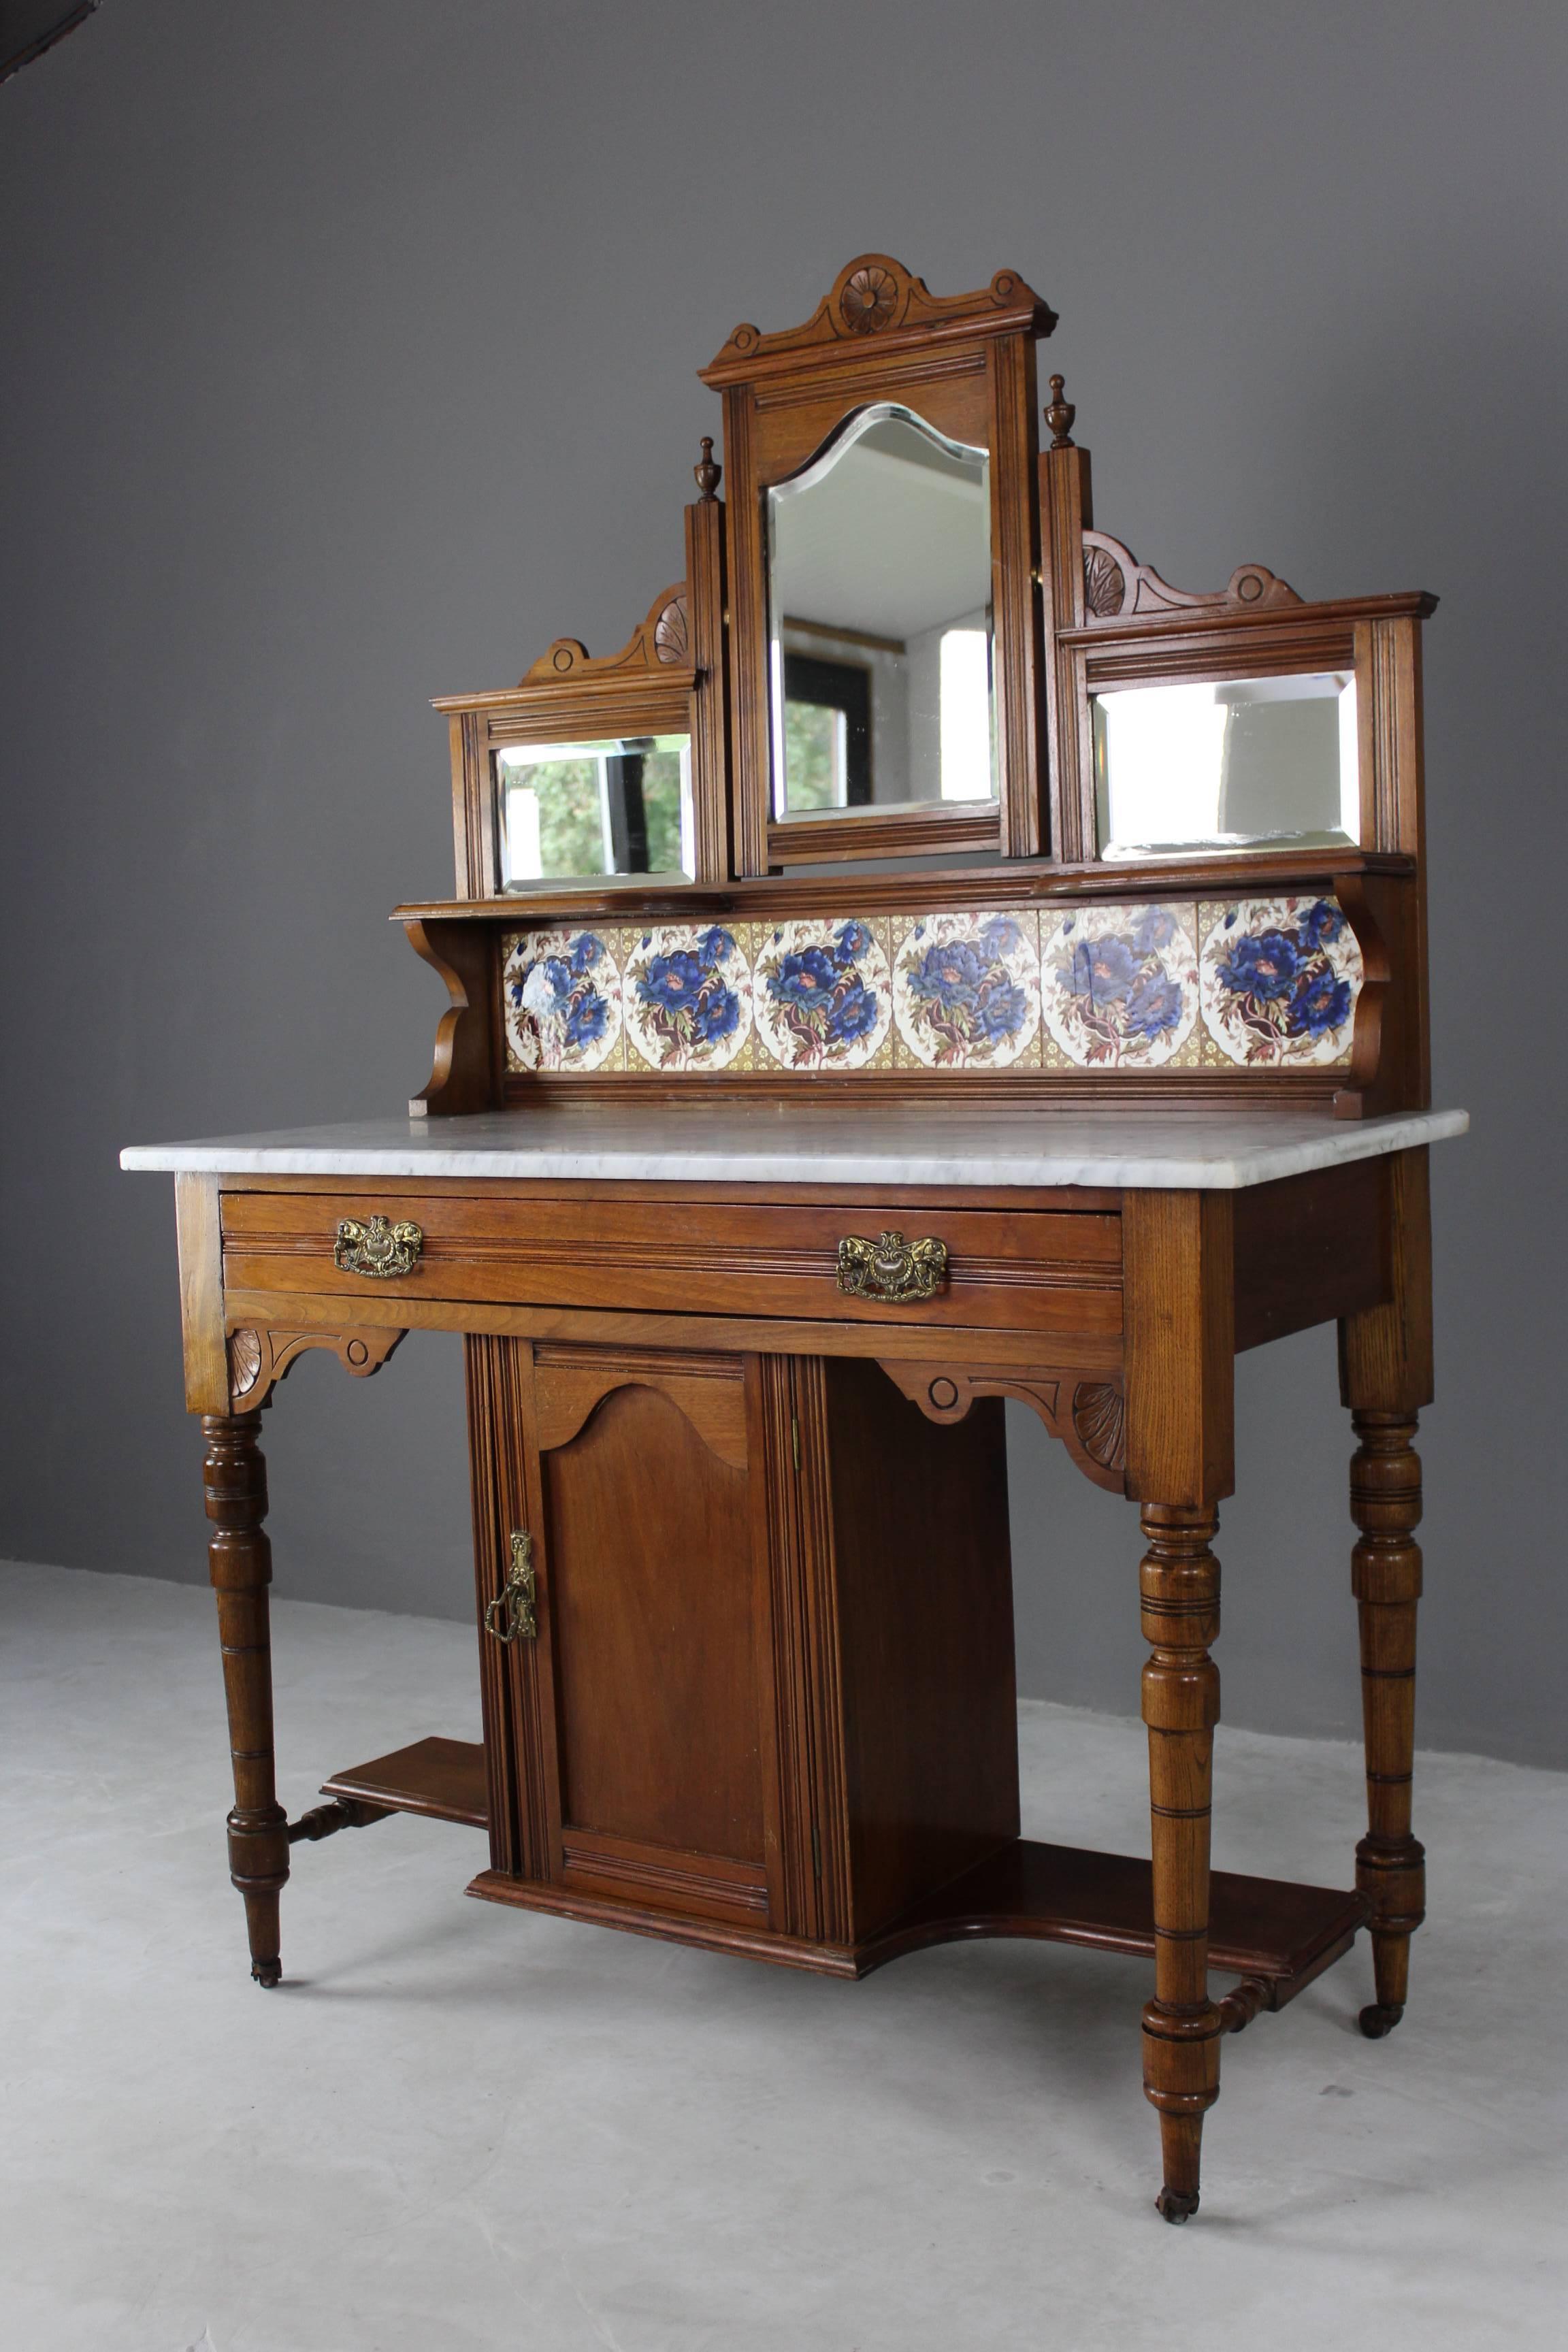 Antique marble-top washstand. Late Victorian walnut washstand with marble top, tiled back splash with mirror above, single drawer and central pot cupboard below on turned legs & castors.

Dimensions: 107 cm wide x 48 cm deep x 79 cm high x 157 cm